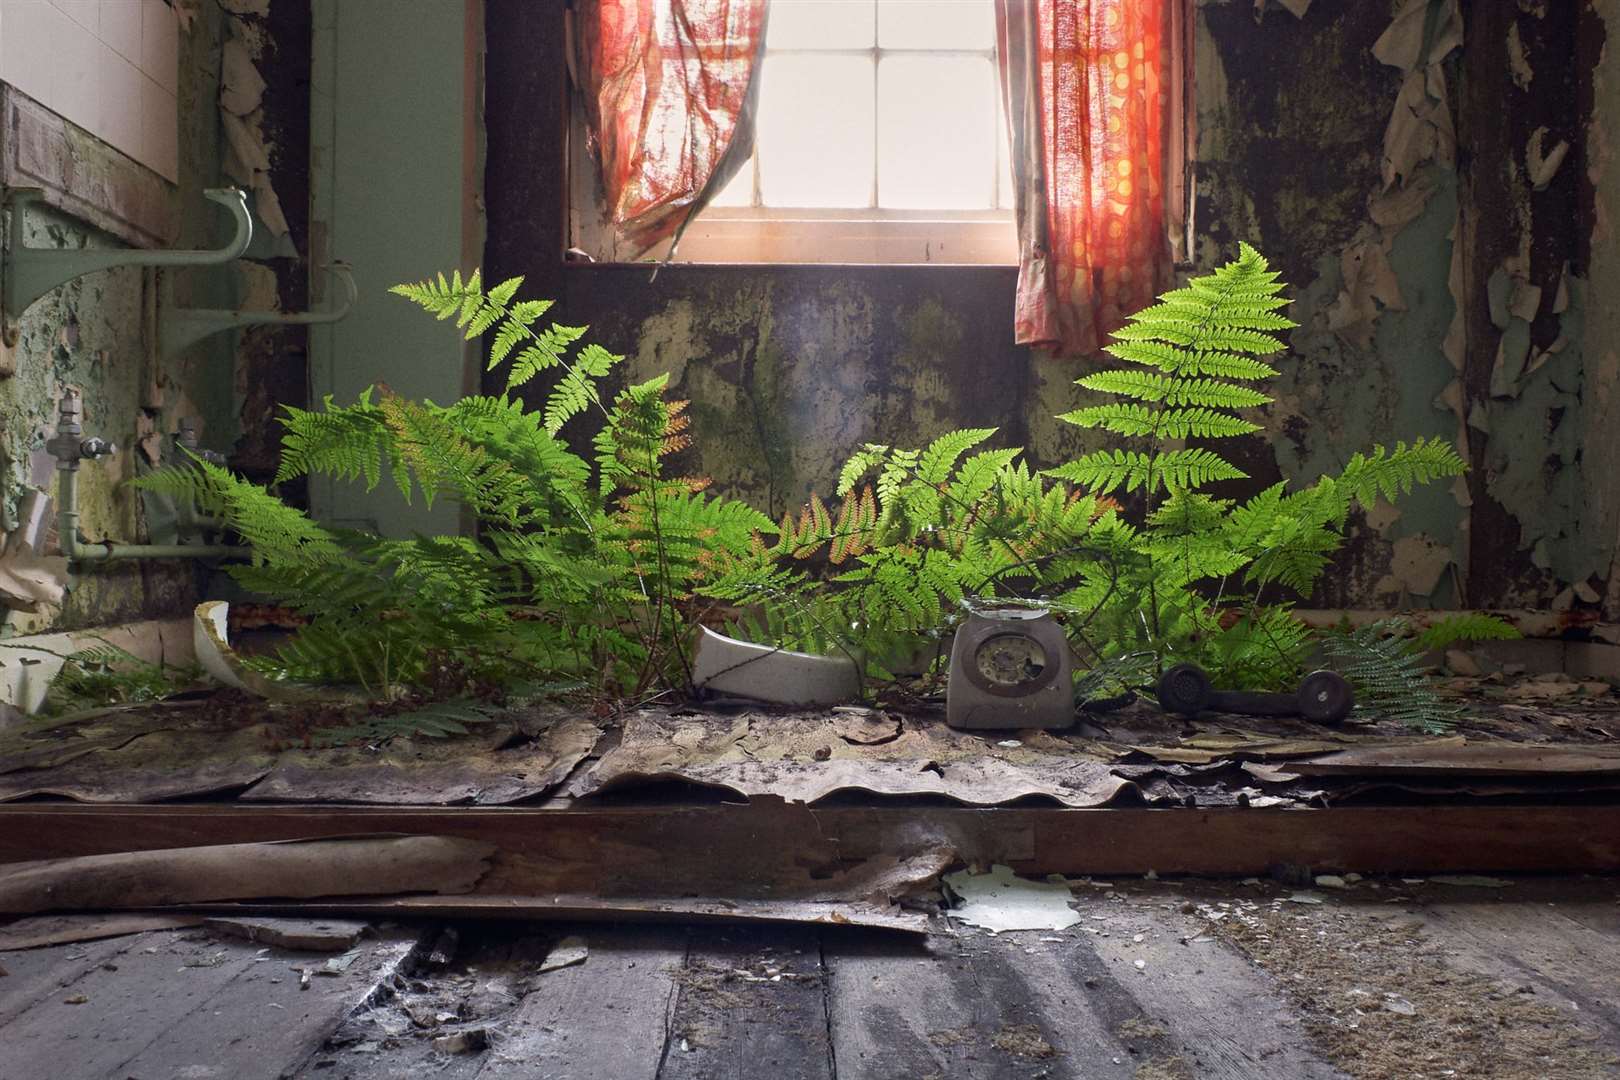 Photographer Jamie McGregor Smith won an award for this picture, taken in the derelict Leybourne Grange manor house in 2006